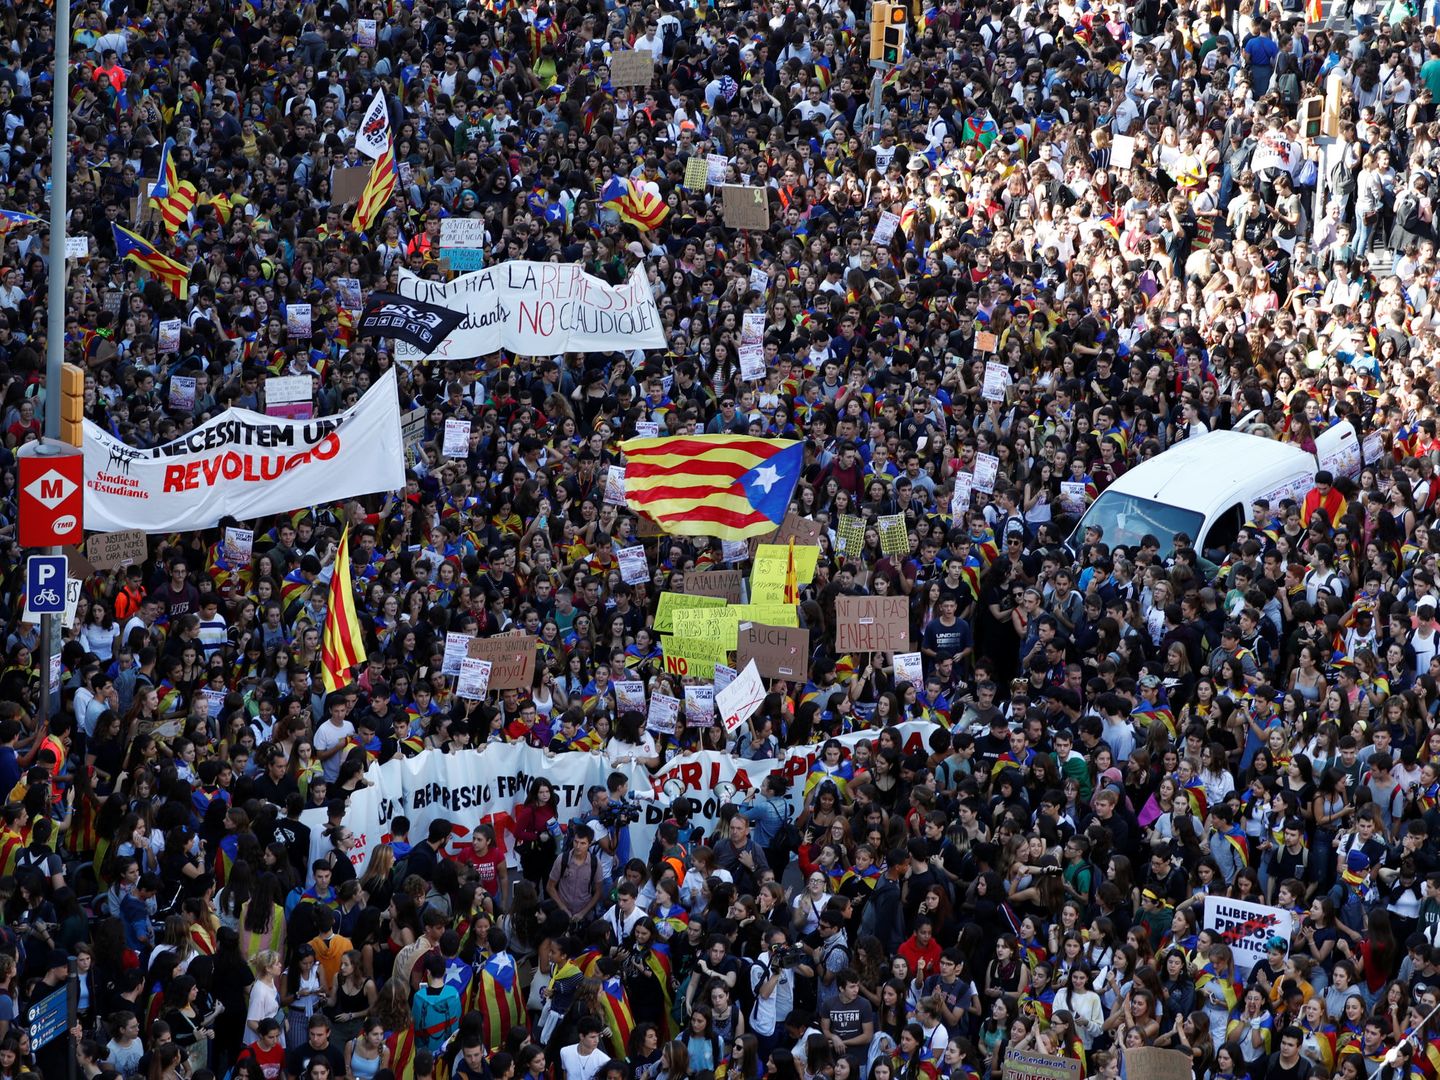 Students protest at University square after a verdict in a trial over a banned Catalonia's independence referendum in Barcelona, Spain, Spain, October 17, 2019. REUTERS Jon Nazca